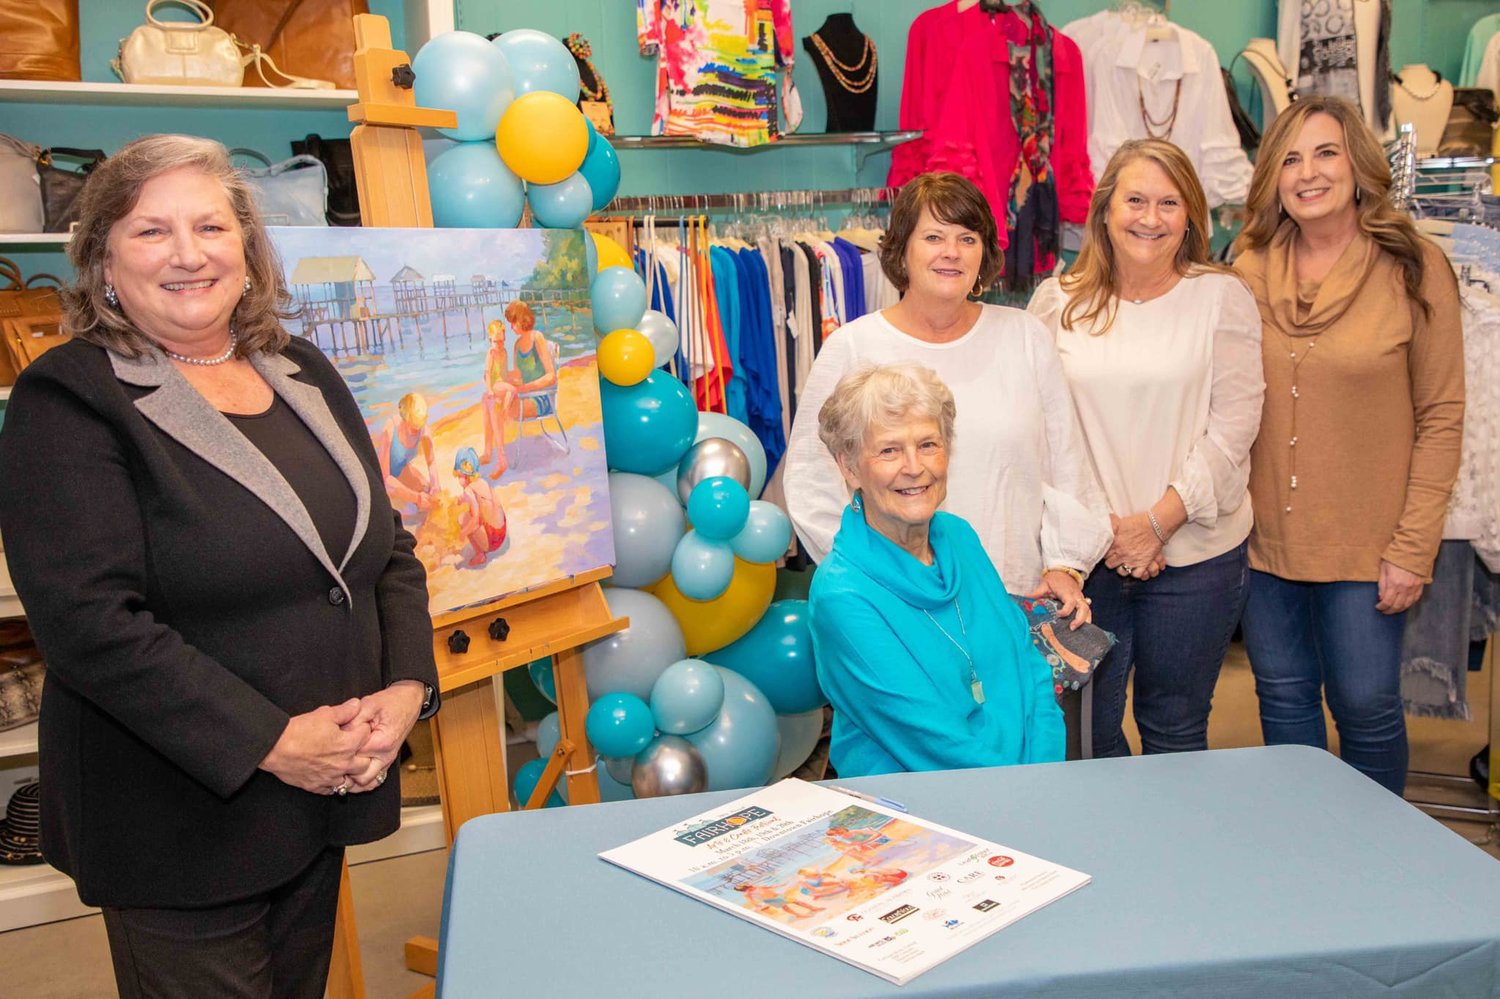 The Fairhope Arts and Crafts Festival Foundation unveiled the 2022 Featured Artist for the 70th Annual Fairhope Arts and Crafts Festival, Jo Patton. Her painting titled "Building Memories" will be the centerpiece of the festival poster.